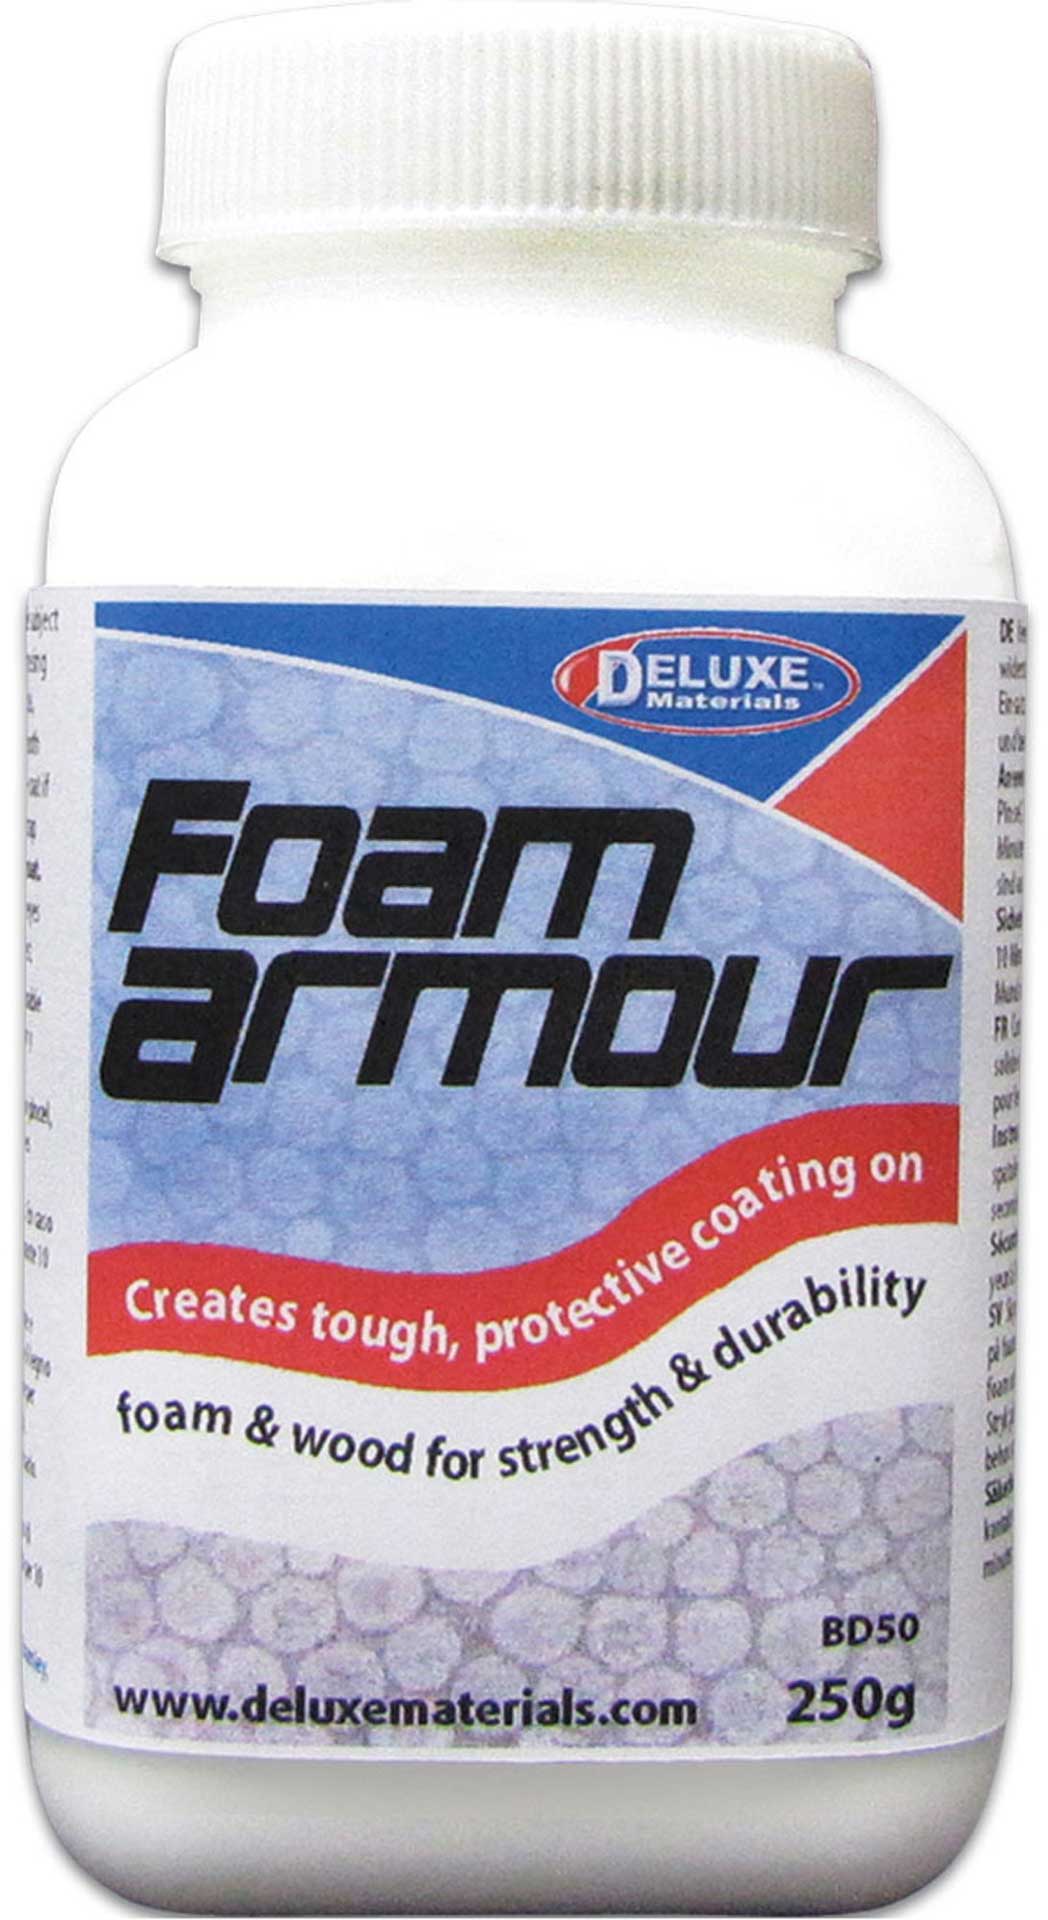 DELUXE FOAM ARMOUR 250G CONSOLIDATION